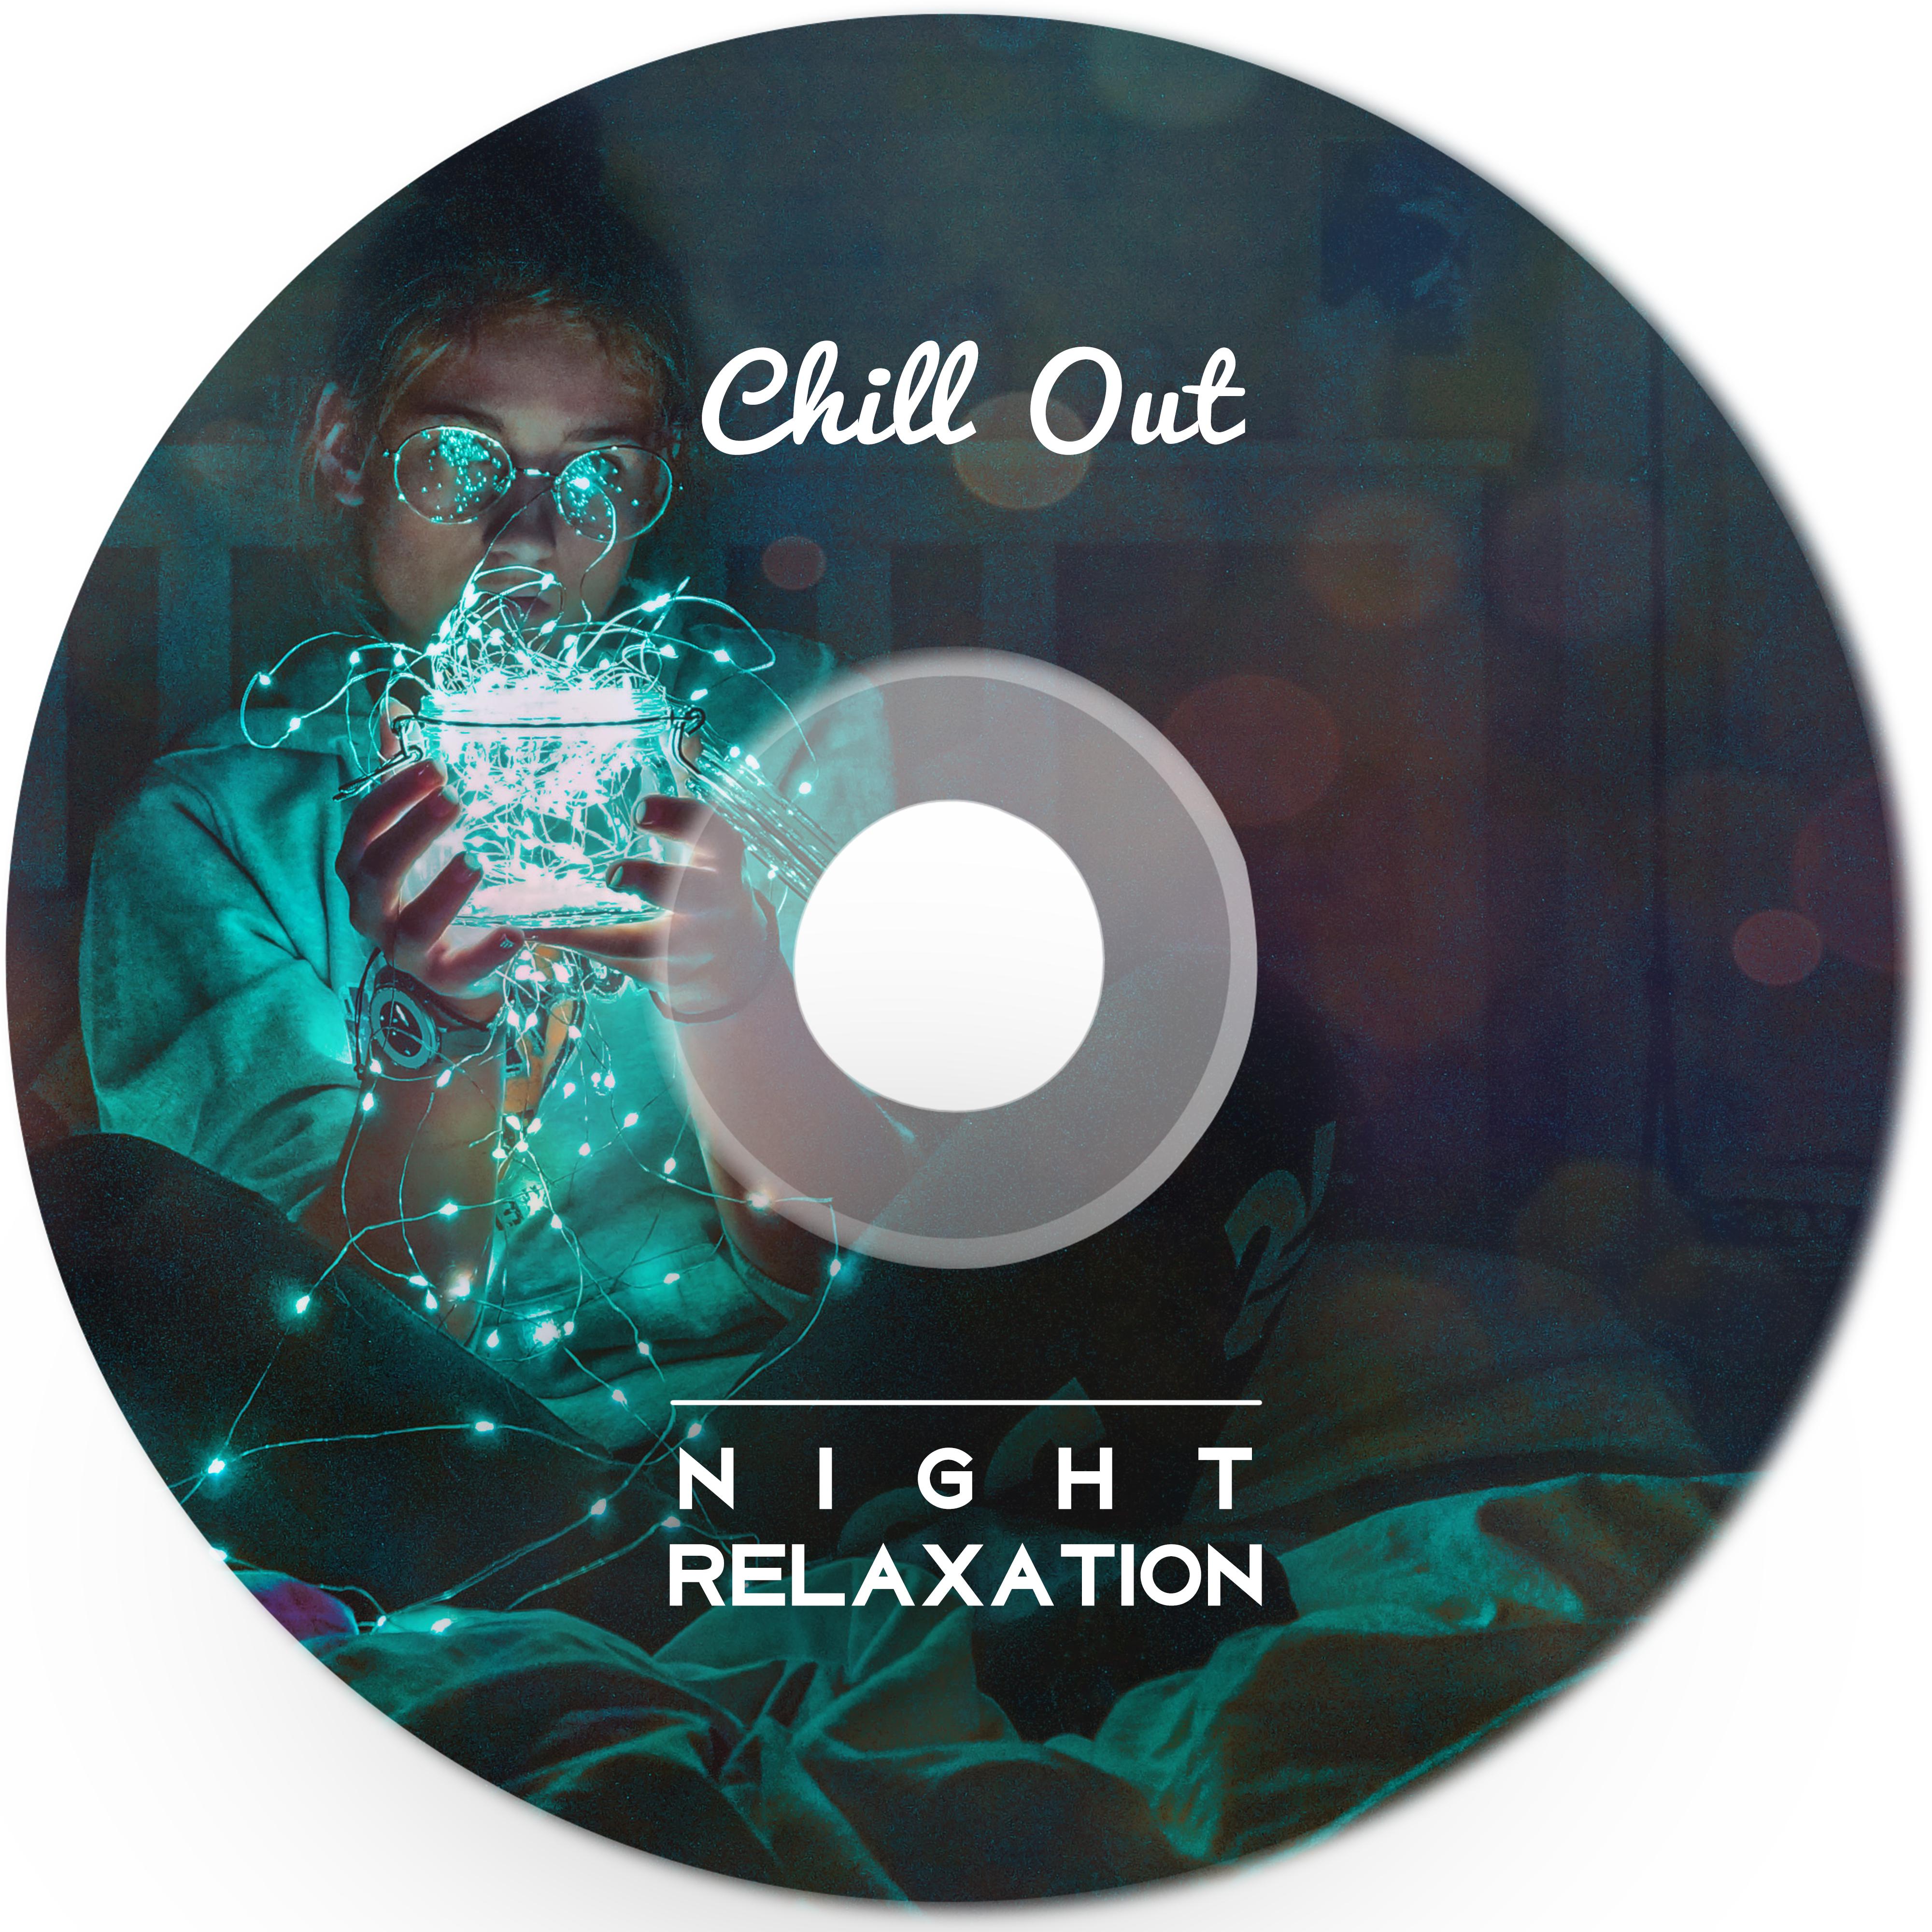 Chill Out Night Relaxation – Calm Melodies for Night Relaxation, Chill Out Sounds, Peaceful Beats to Rest